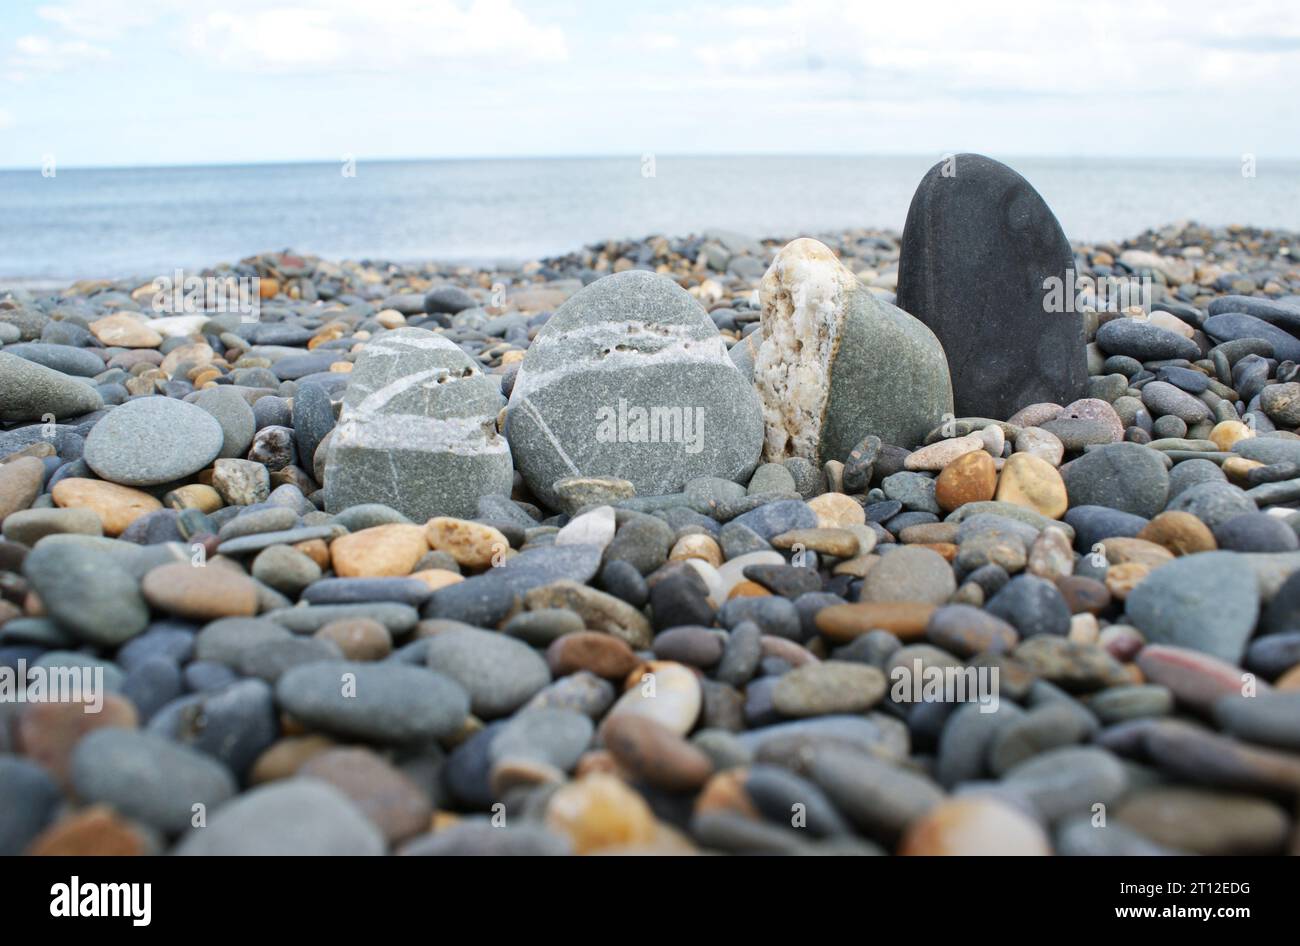 A row of stones on a rocky beach. Various pebbles and stones. Stock Photo